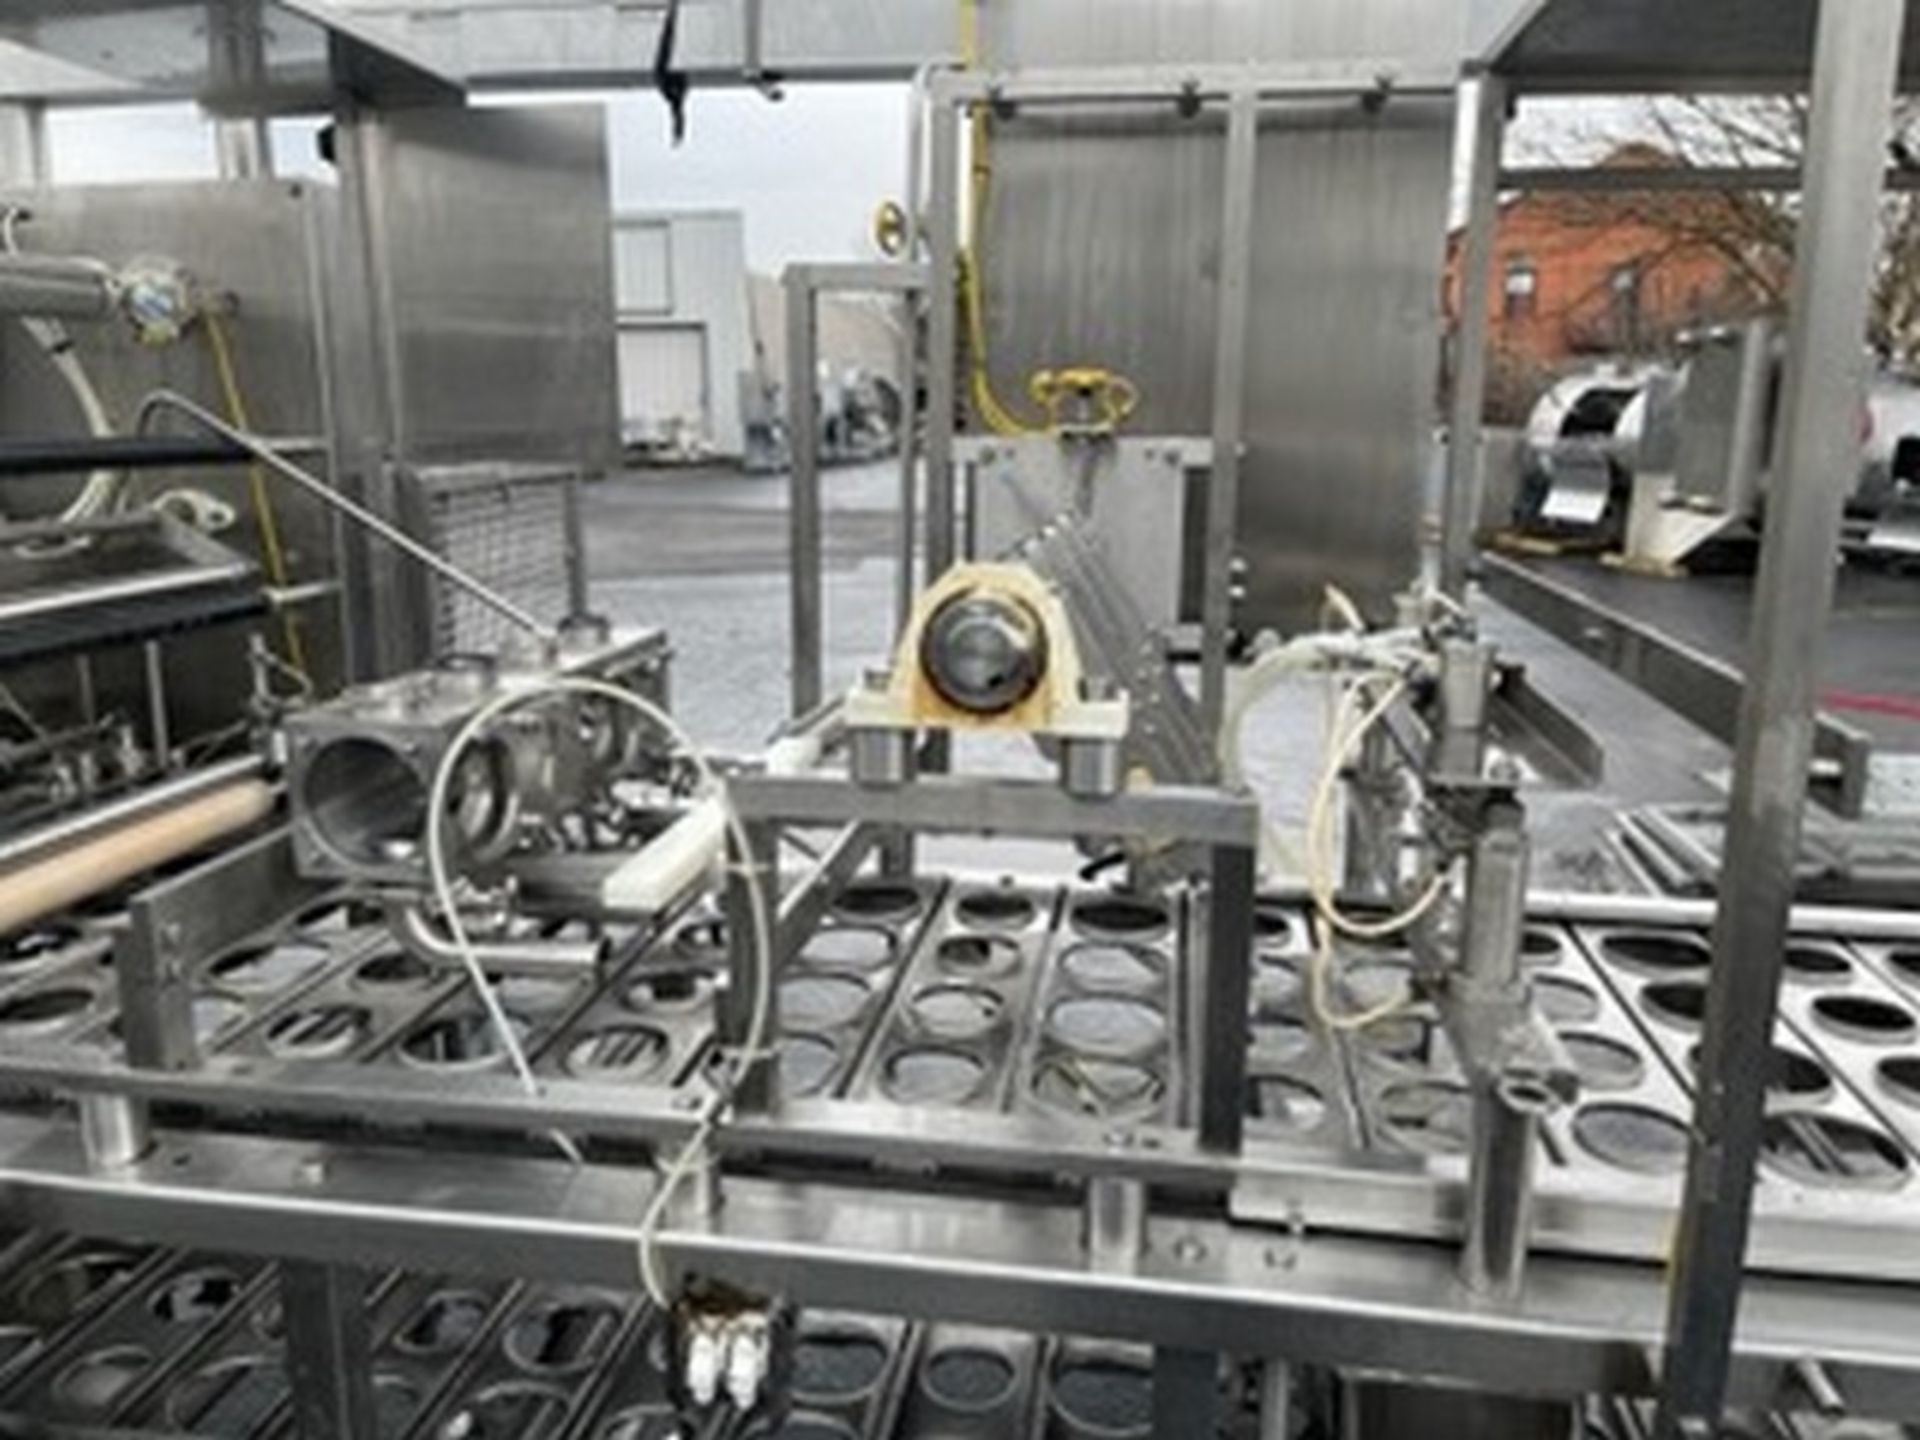 Osgood 4-Lane In-Line S/S Cup Filler,M/N 4800-E, S/N 351-840, Set Up with 3-5/8" W On-Board Change - Image 5 of 18